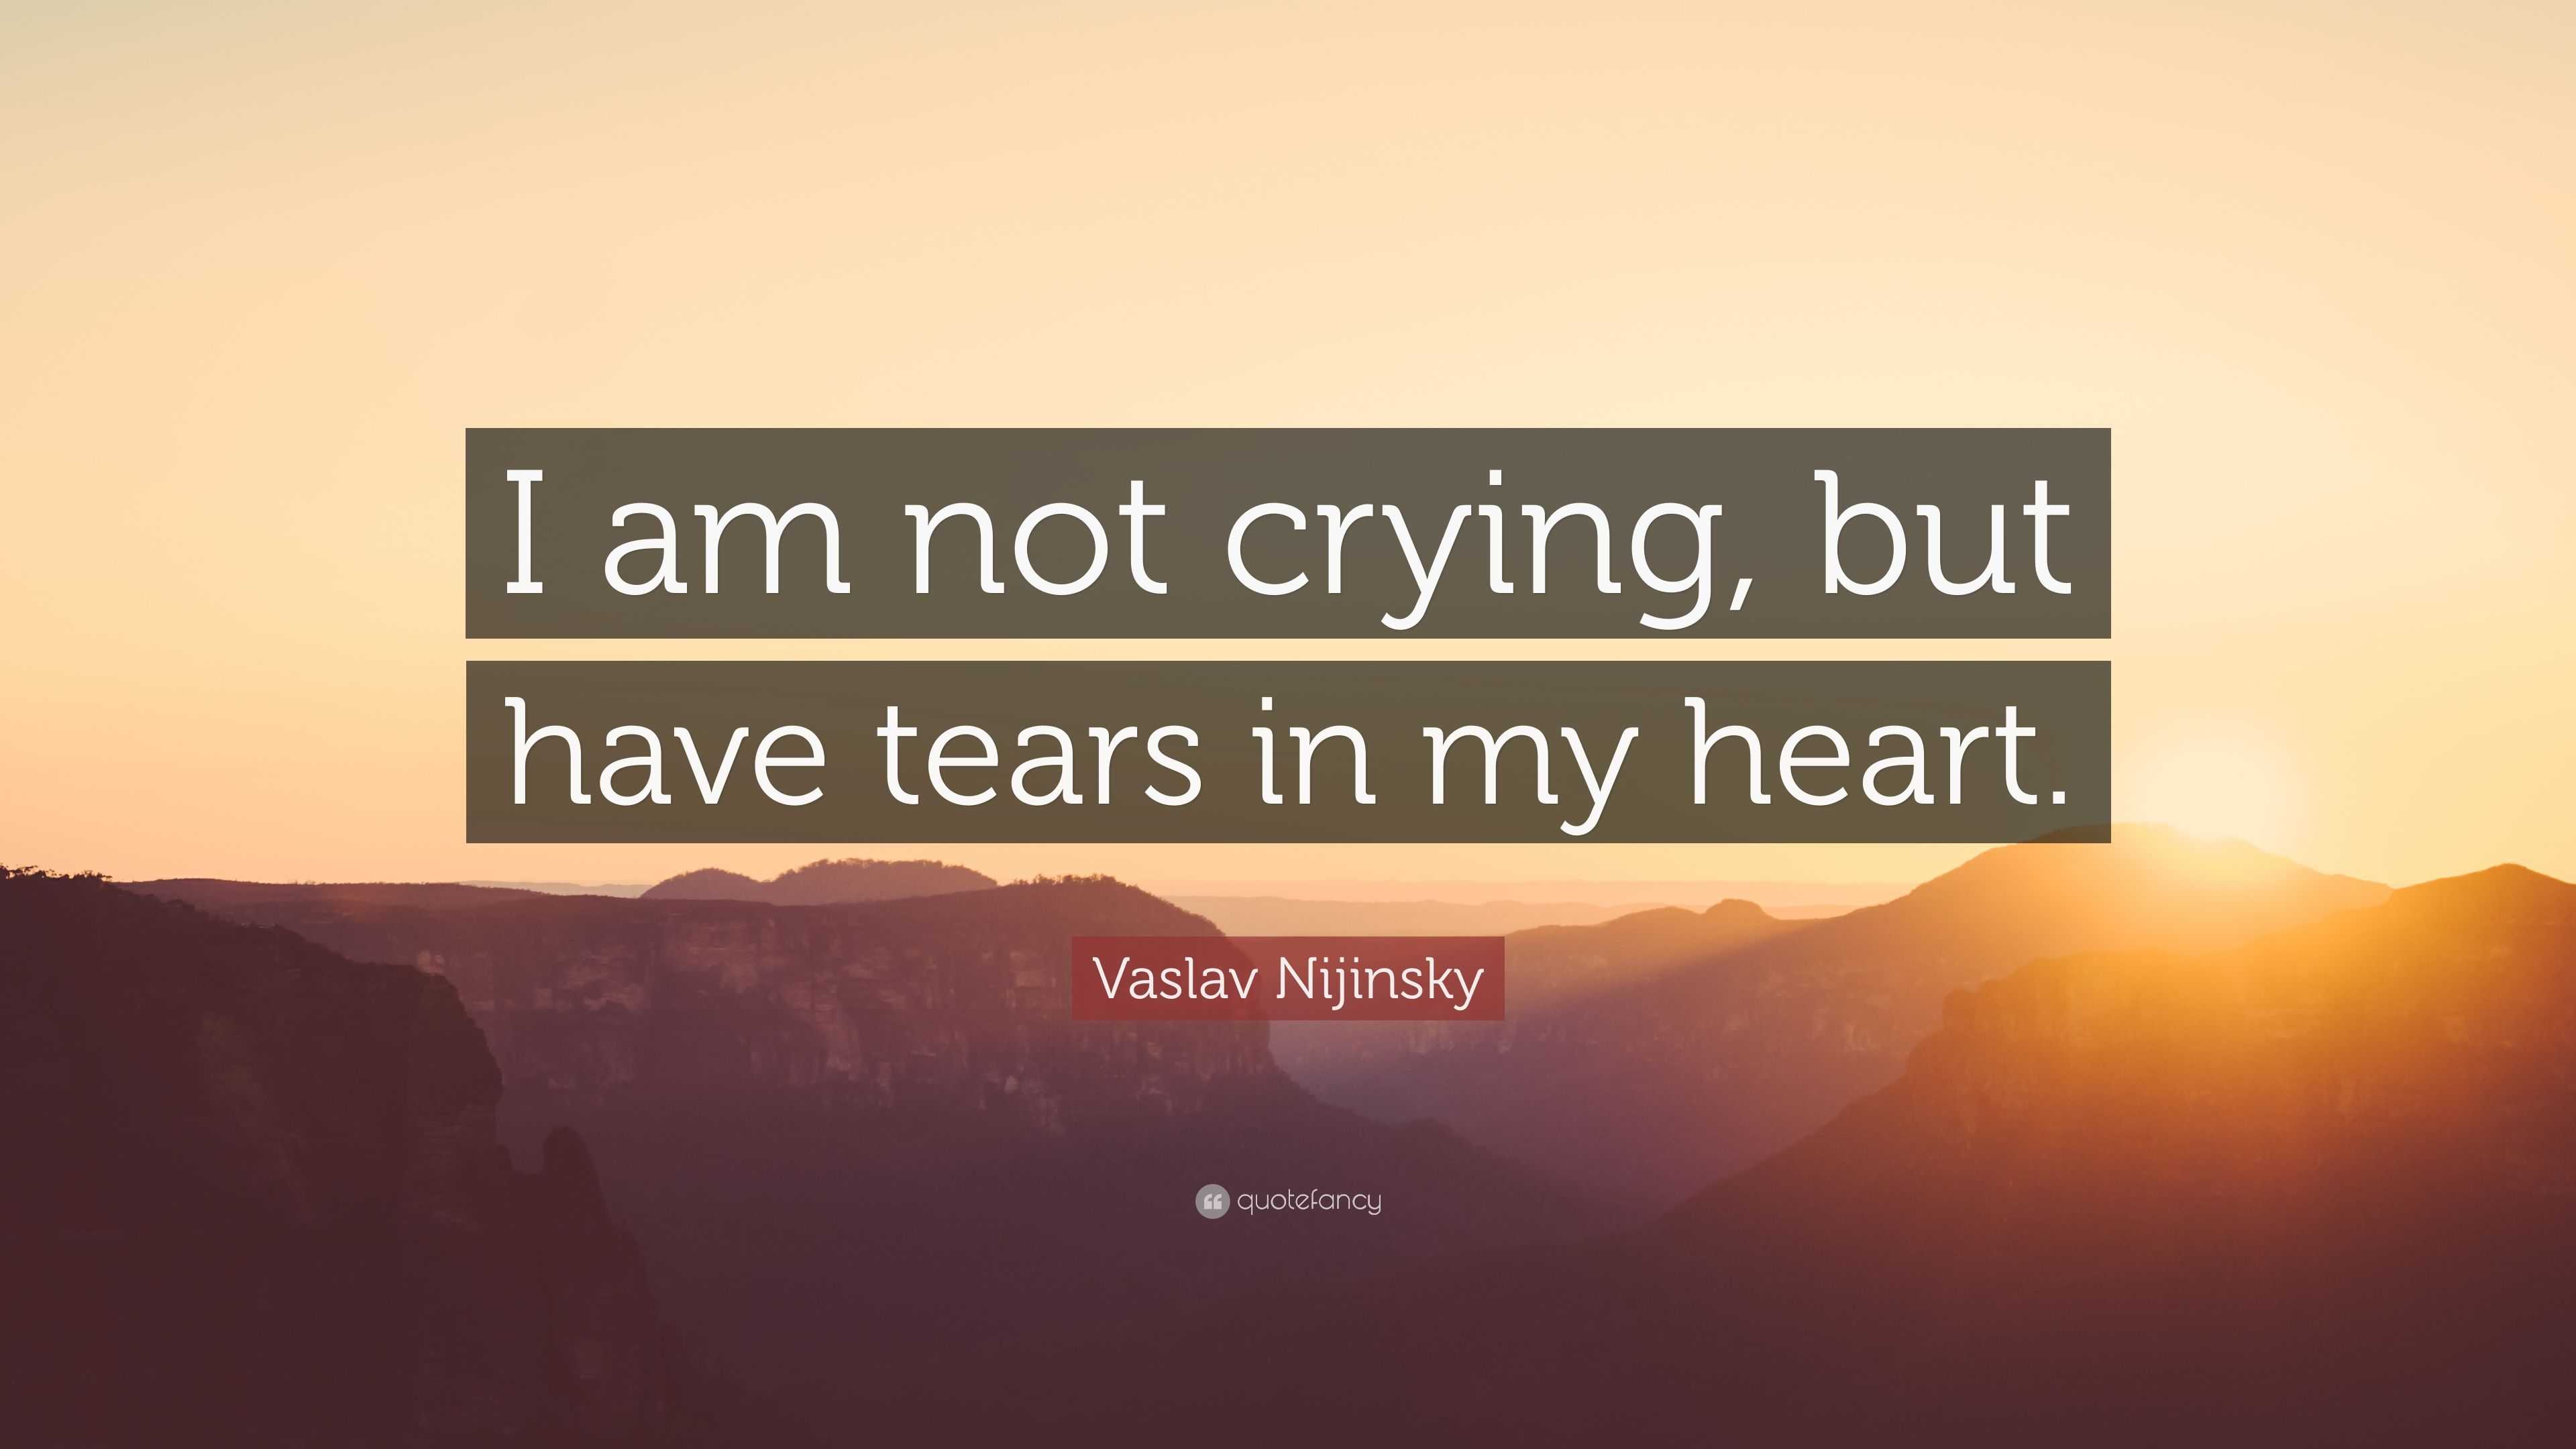 my heart is crying quotes